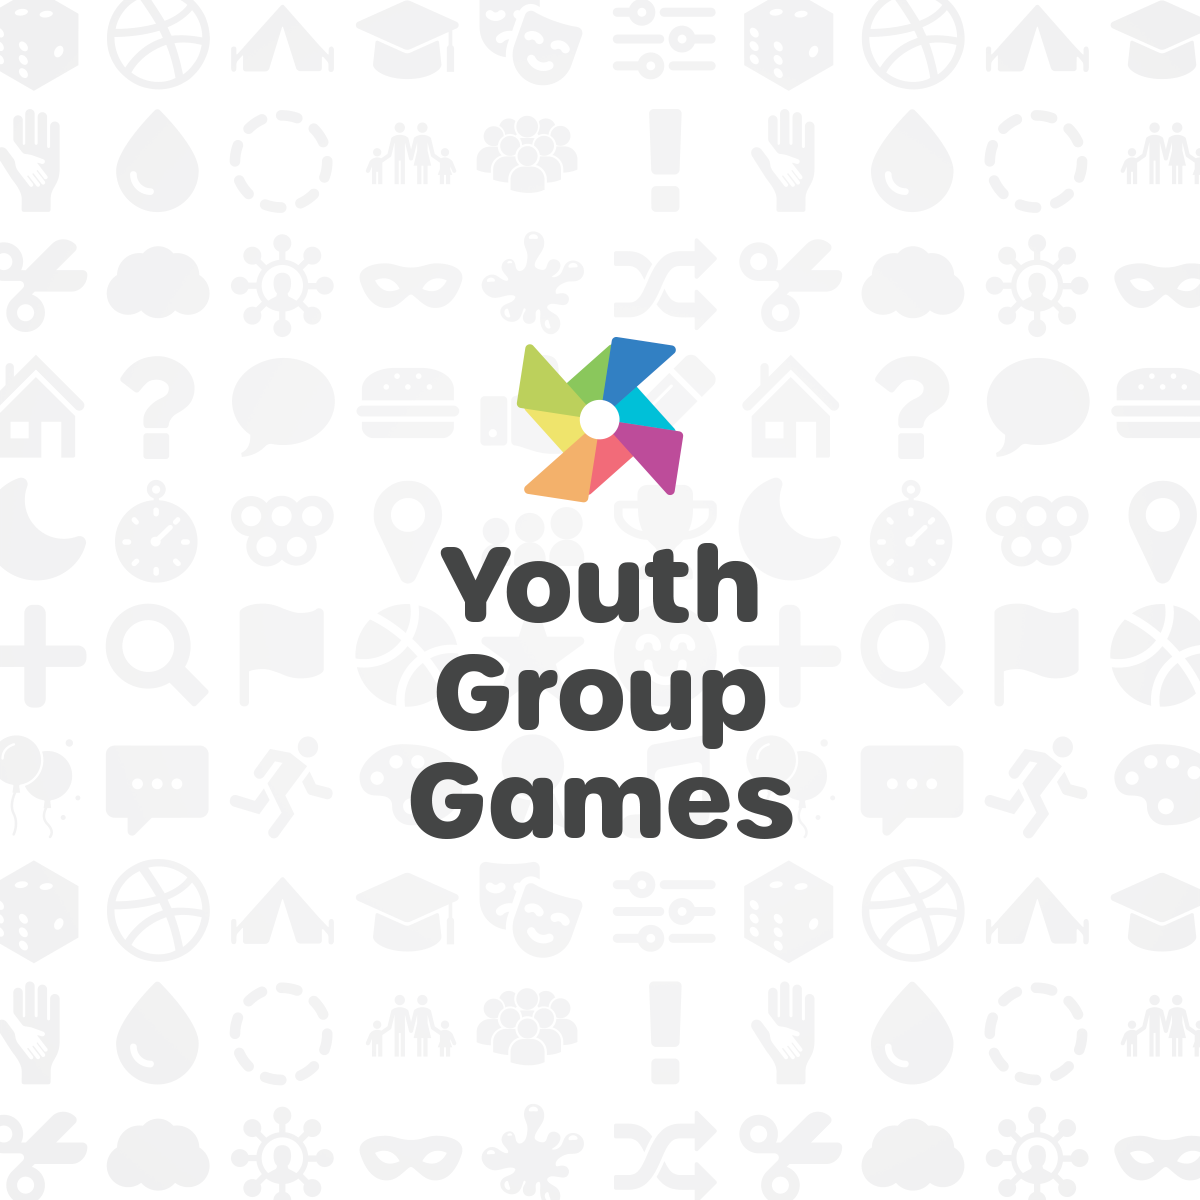 Camp games | Youth Group Games